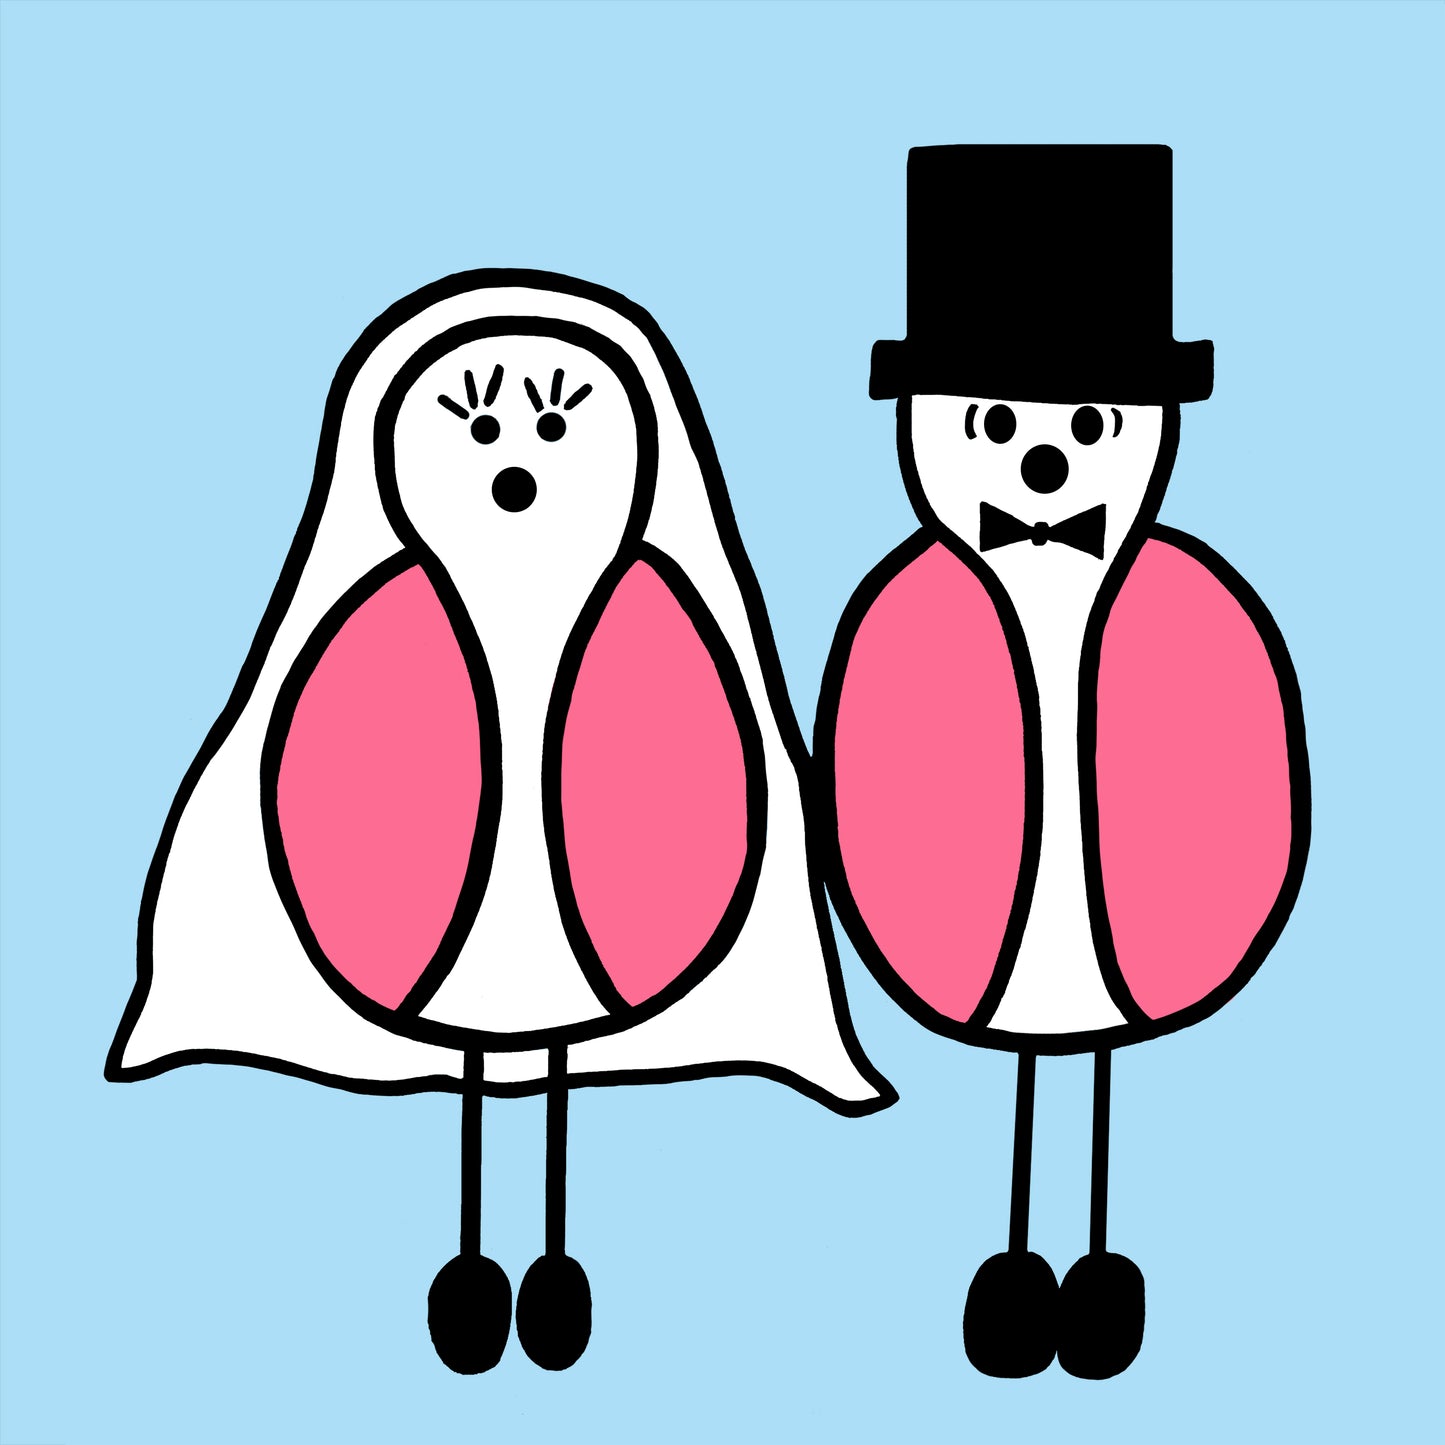 Two pink winged birds are dressed as bride and groom, the bride seagull has large eyelashes with a veil and the groom seagull has a bow tie and top hat. The two birds stand side by side, the background is a pale blue colour.